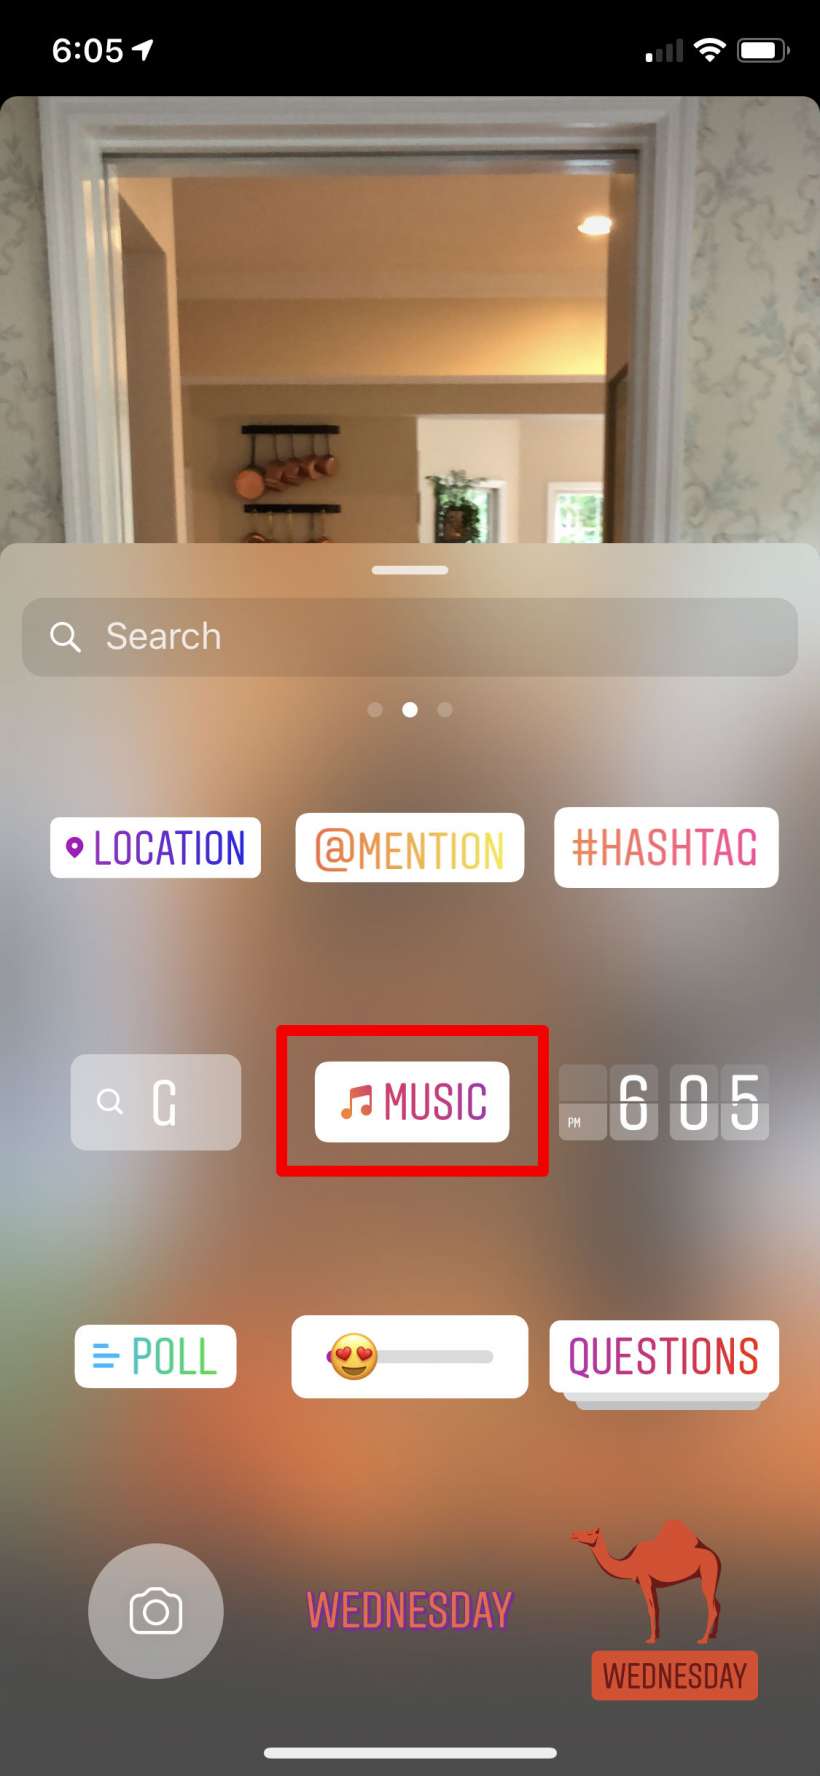 How to add a music soundtrack to your Instagram posts and stories on iPhone and iPad.